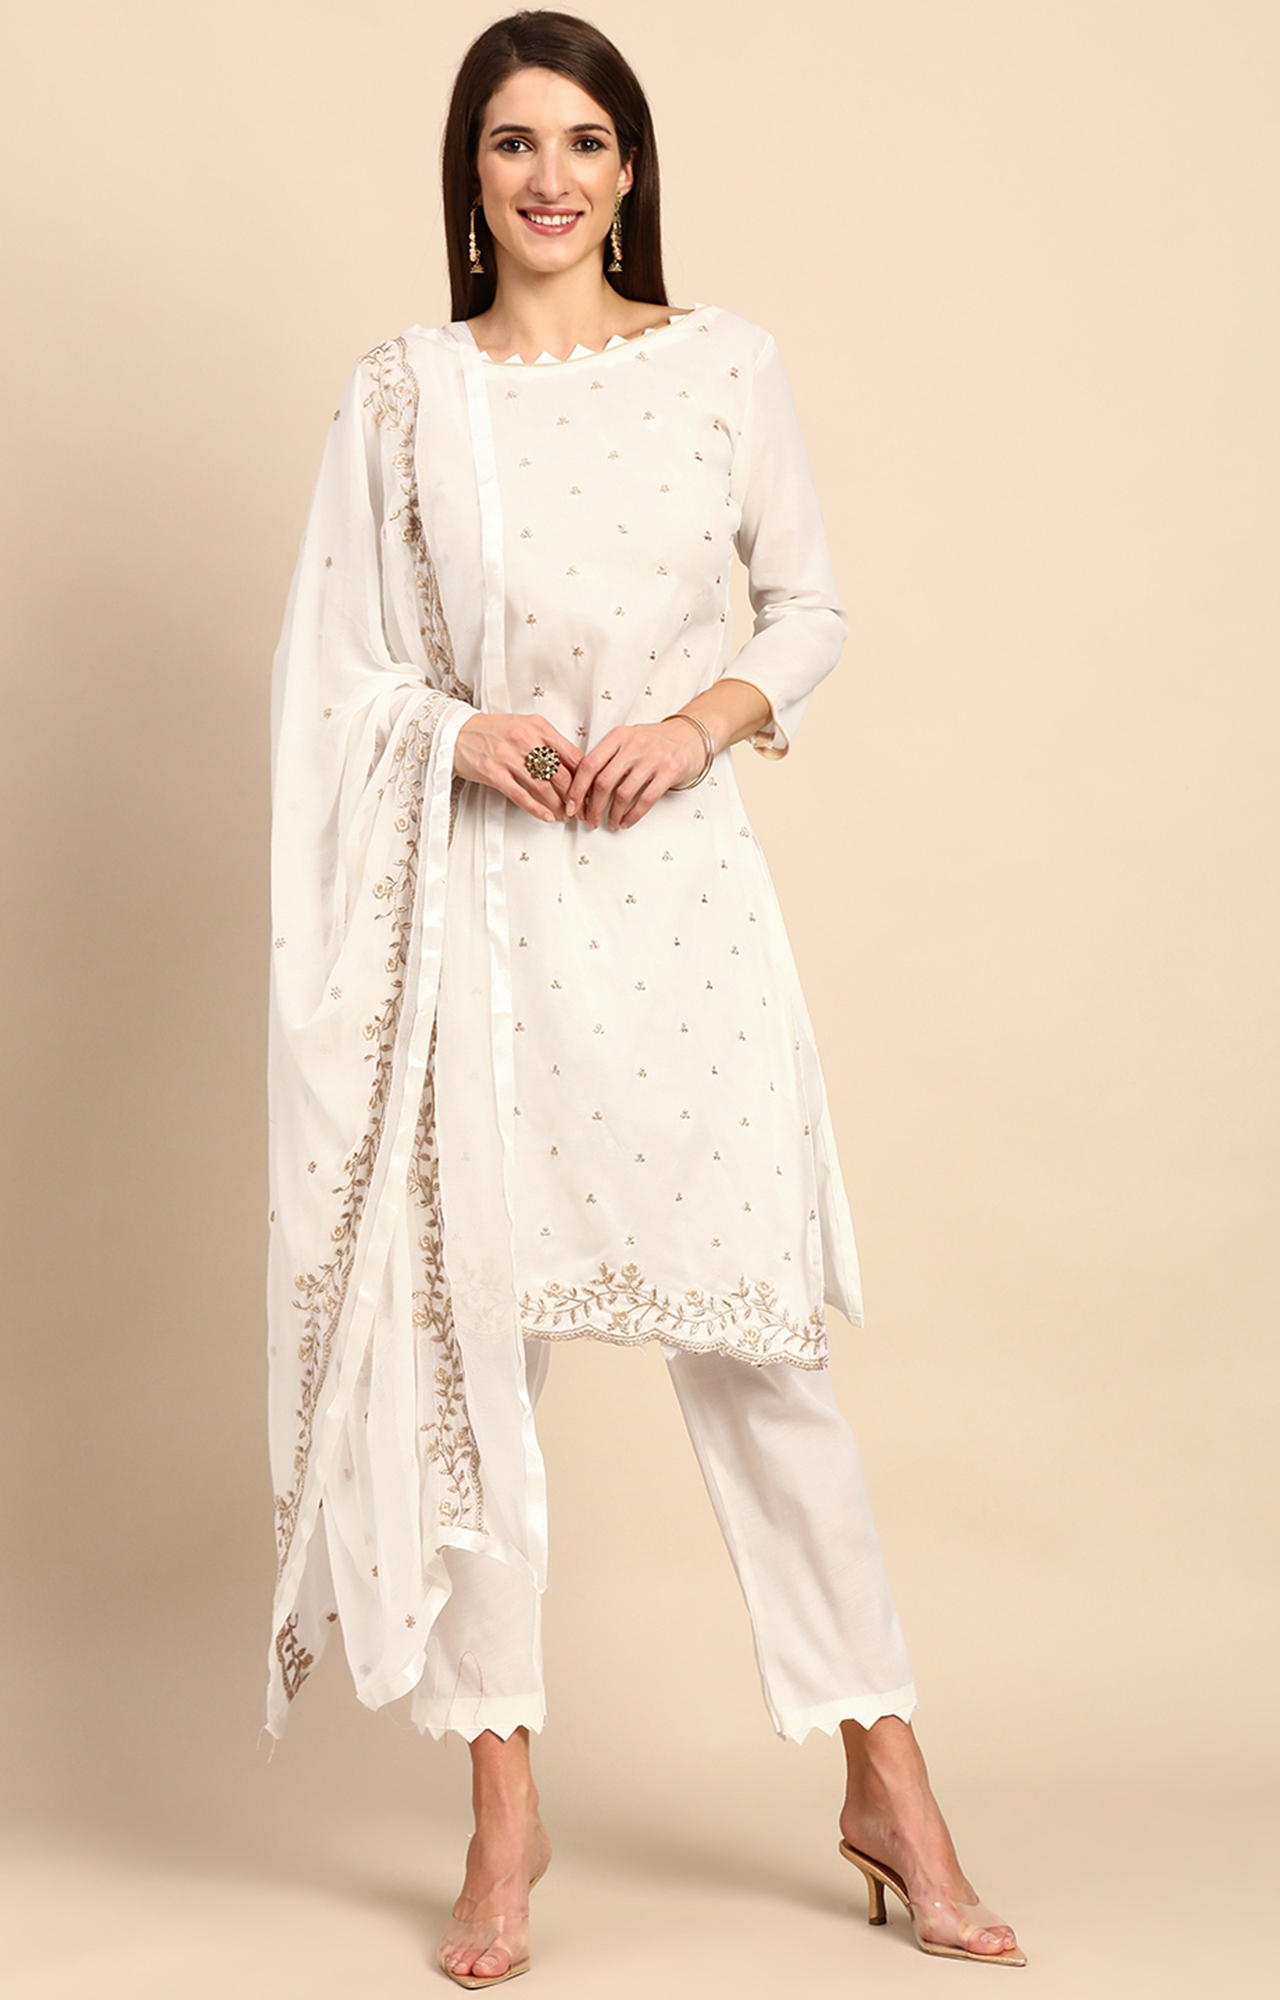 Great Indian Sale Dresses for women party wear Dress Material Designer  Clothing Today Offers Low Price White Color Crepe Fabric Free Size Salwar  Suit : Amazon.in: Bags, Wallets and Luggage